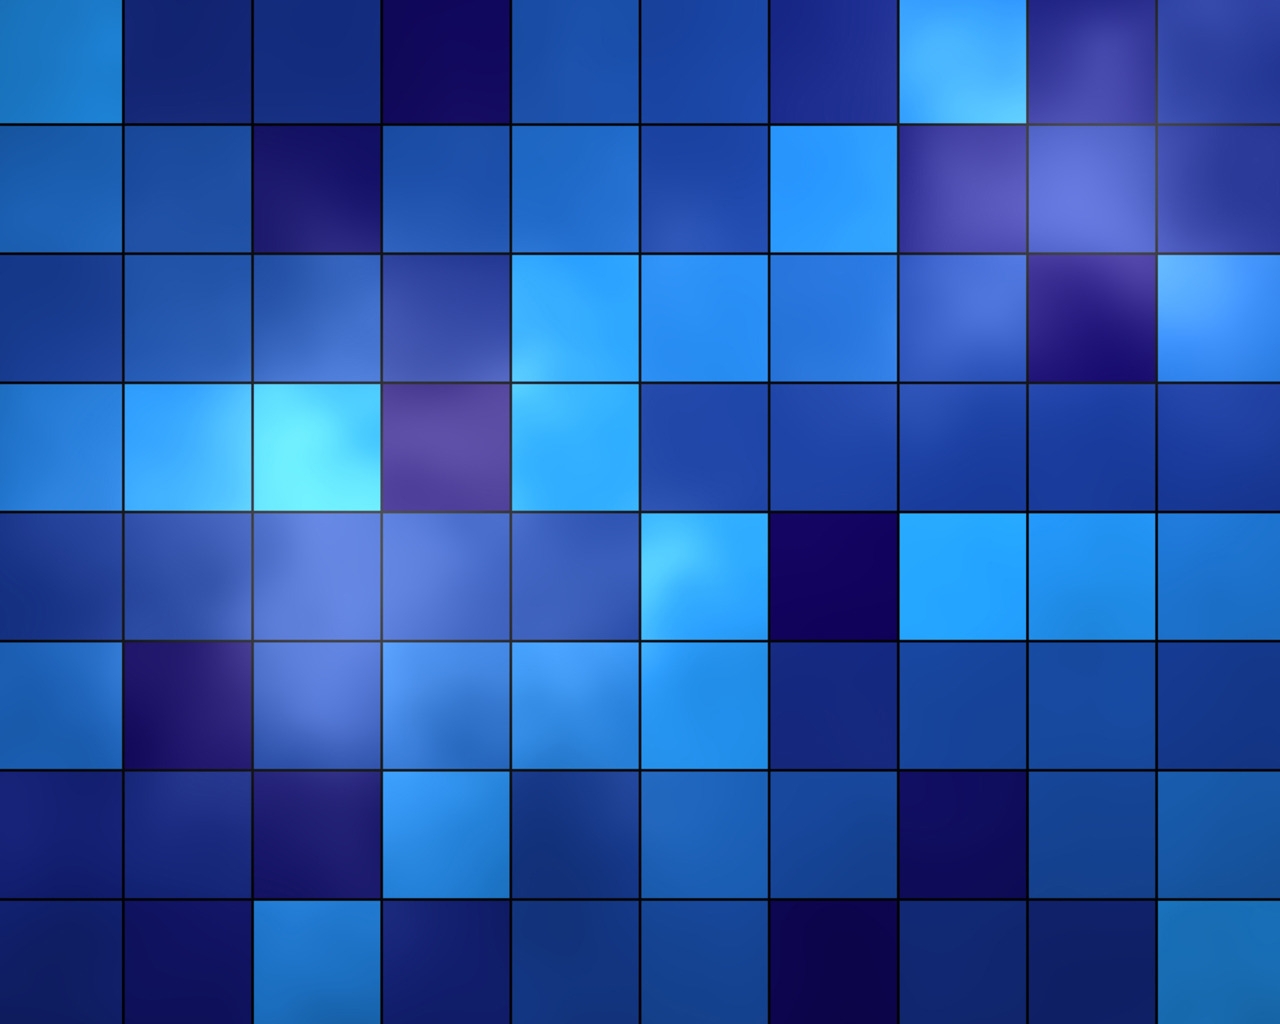 Blue Tiles for 1280 x 1024 resolution